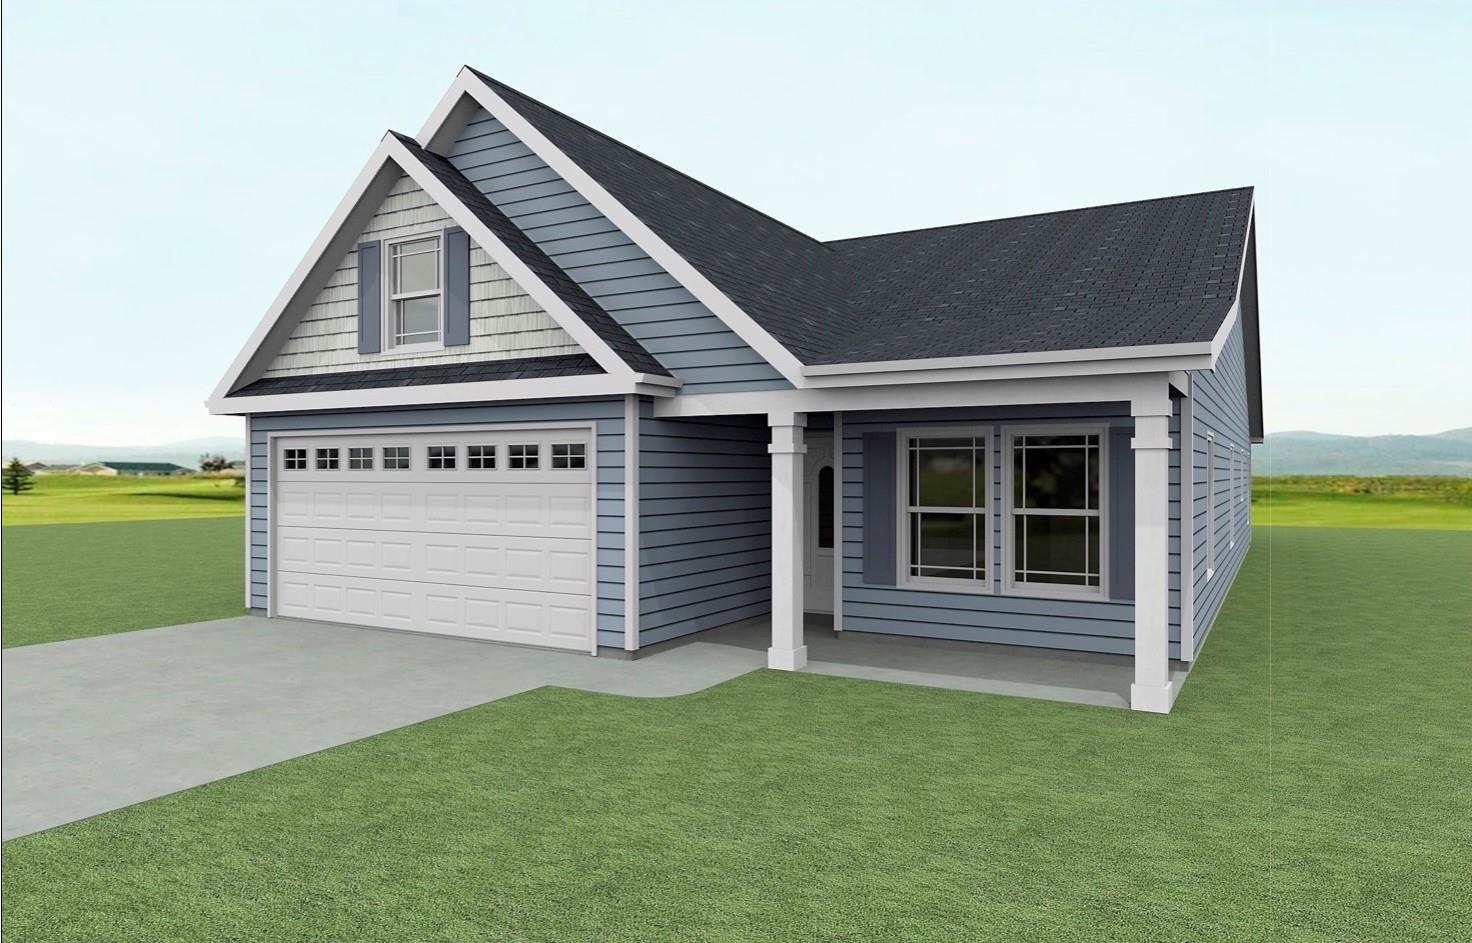 This is the BISHOP floorplan. 3 bedrooms 2 bathrooms plus office/study, trey ceiling with rope lighting in master bedroom, gas fireplace, and 12x12 back patio. Located in the NEW Elliott park community in Lyman just minutes from Spartanburg and Greenville. Call today for more info!